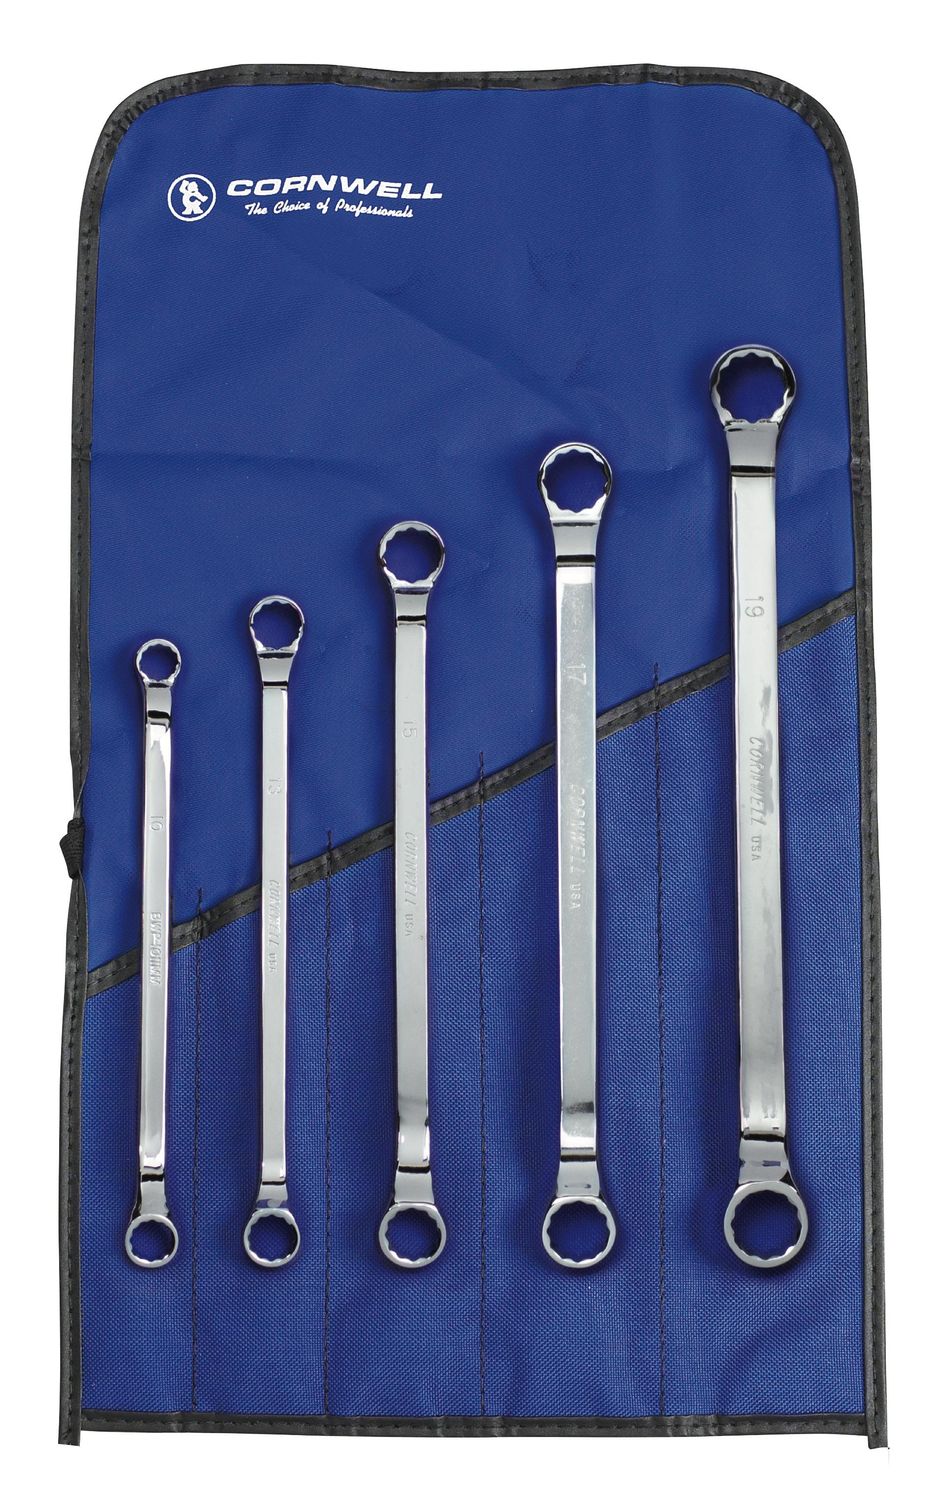 WBMP15S - 5 Piece Metric Offset Box Wrench Set, 12 Point